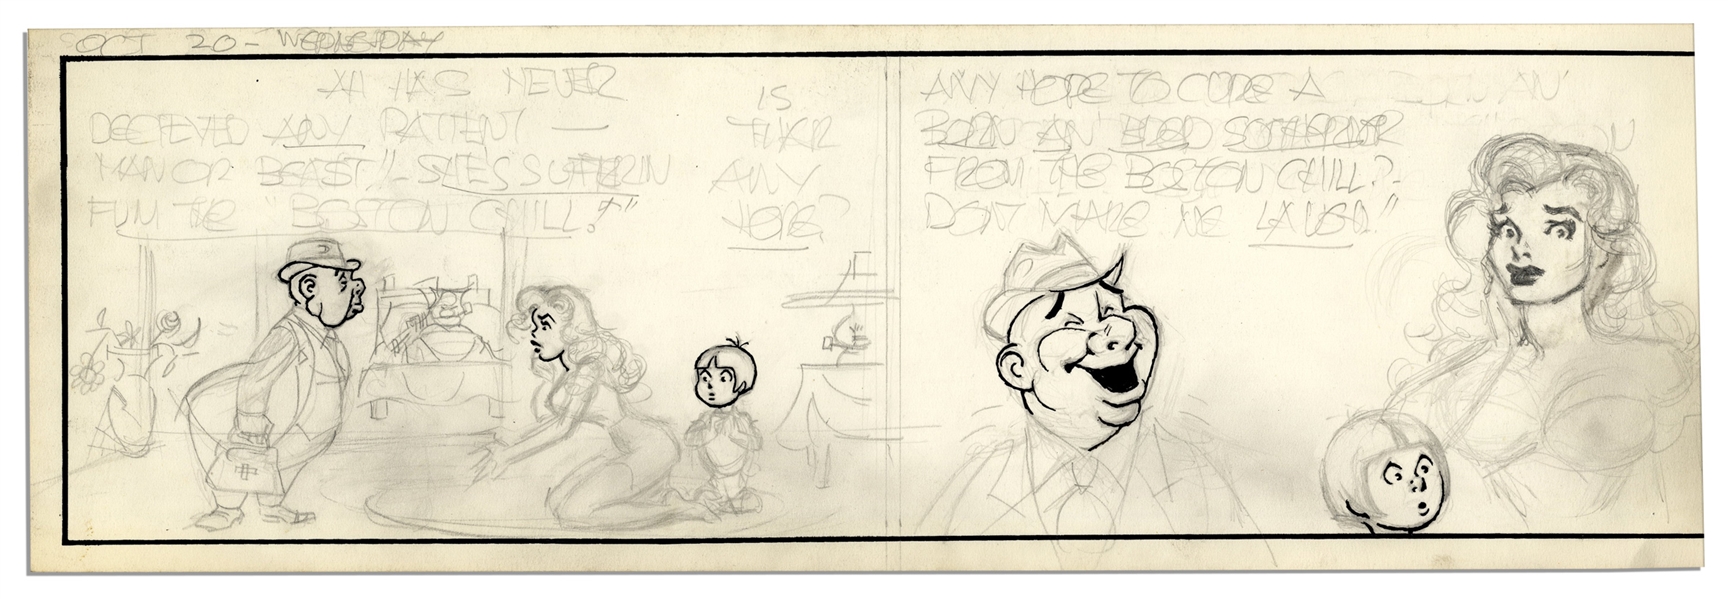 Unfinished ''Li'l Abner'' Comic Strip by Al Capp, Drawn in Pencil on Both Sides -- Undated & Untitled, Features Daisy Mae & Honest Abe -- 18.5'' x 6.5'' -- Very Good -- From Al Capp Estate